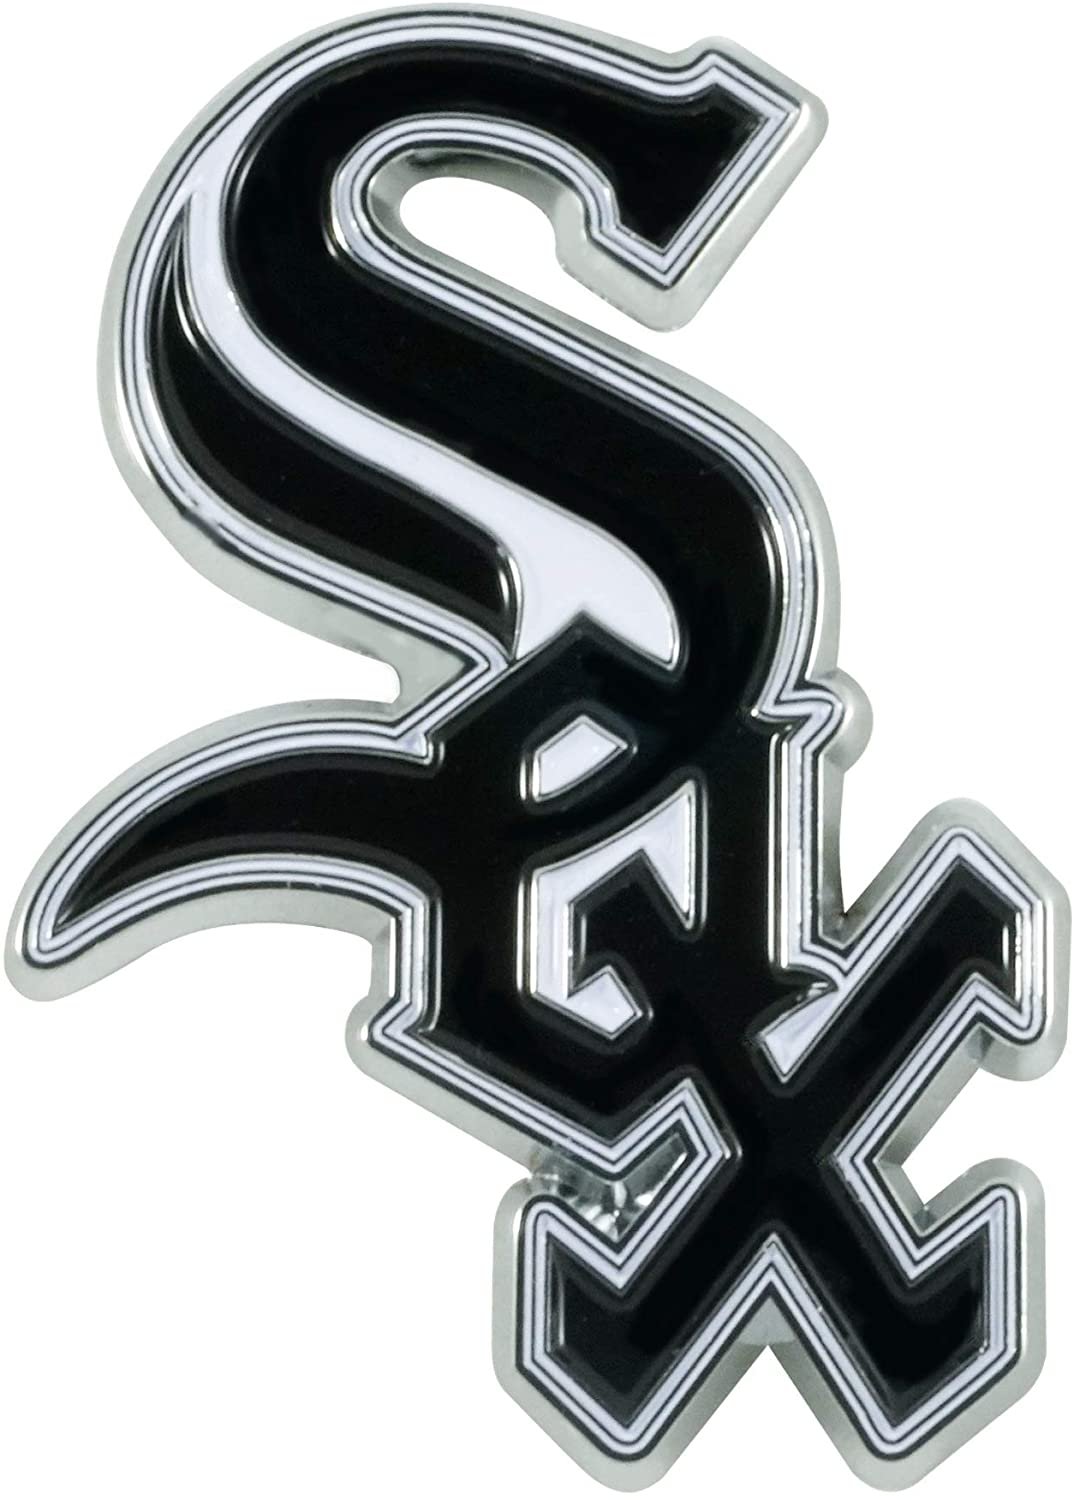 Chicago White Sox Solid Metal Color Auto Emblem Raised Decal Adhesive Tape Backing